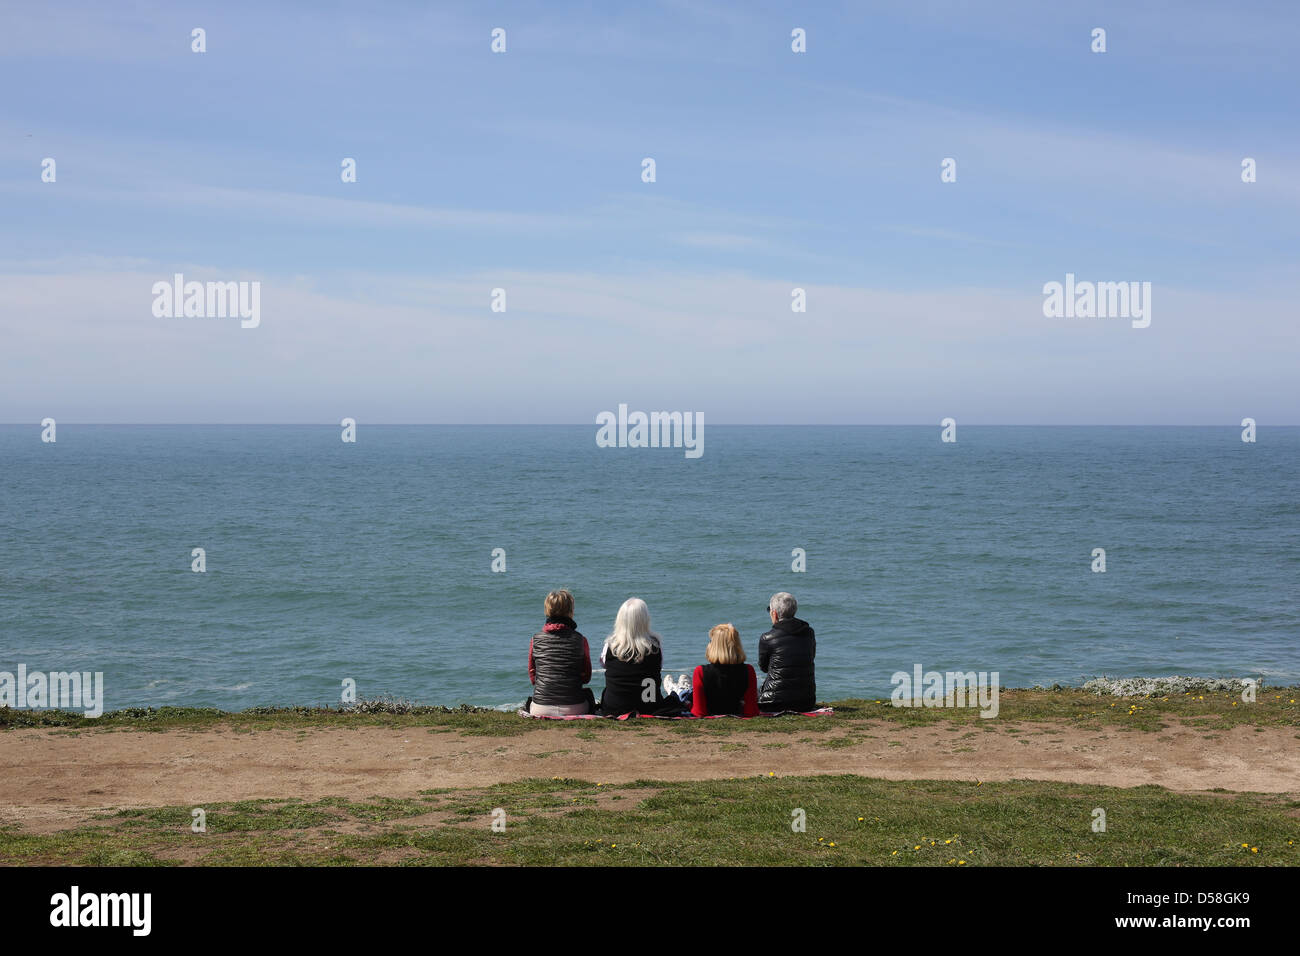 Four senior women sitting on a cliff overlooking the ocean. Stock Photo